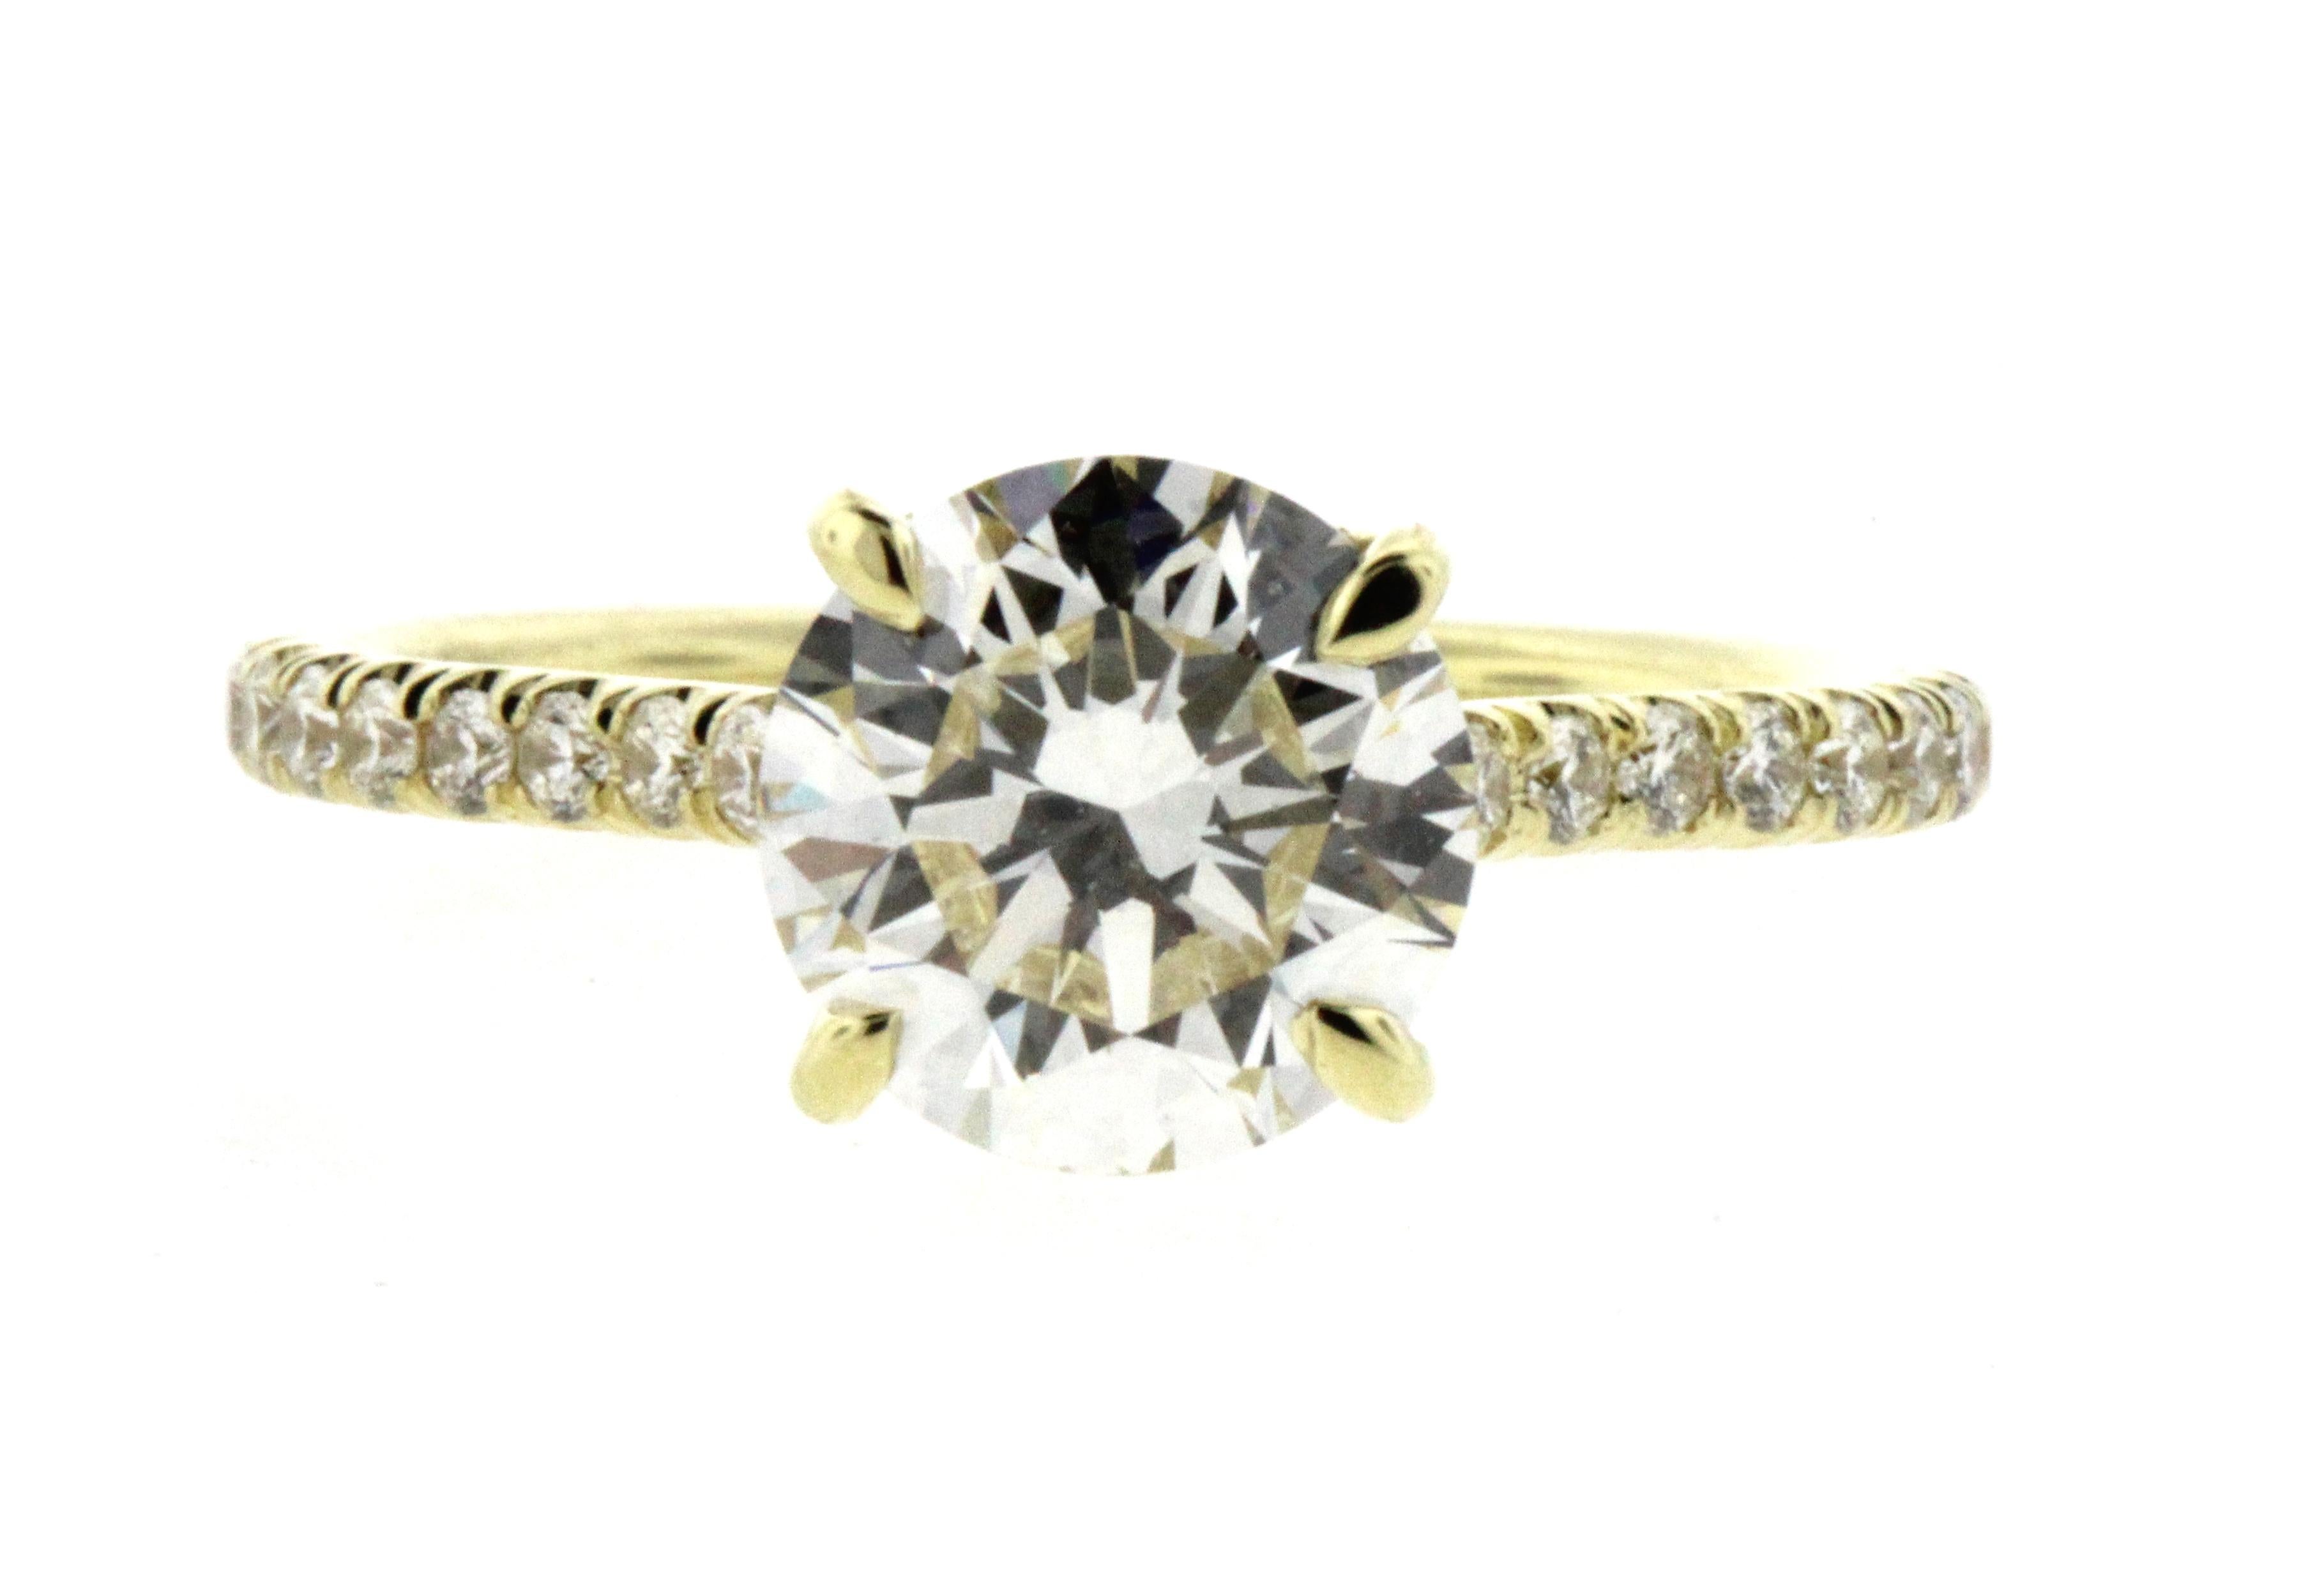 A hidden halo is the perfect type of engagement ring for someone who wants a little something extra on their engagement ring but wants to be discreet about the details. Hidden halos are the perfect way to achieve both the classic solitaire look with